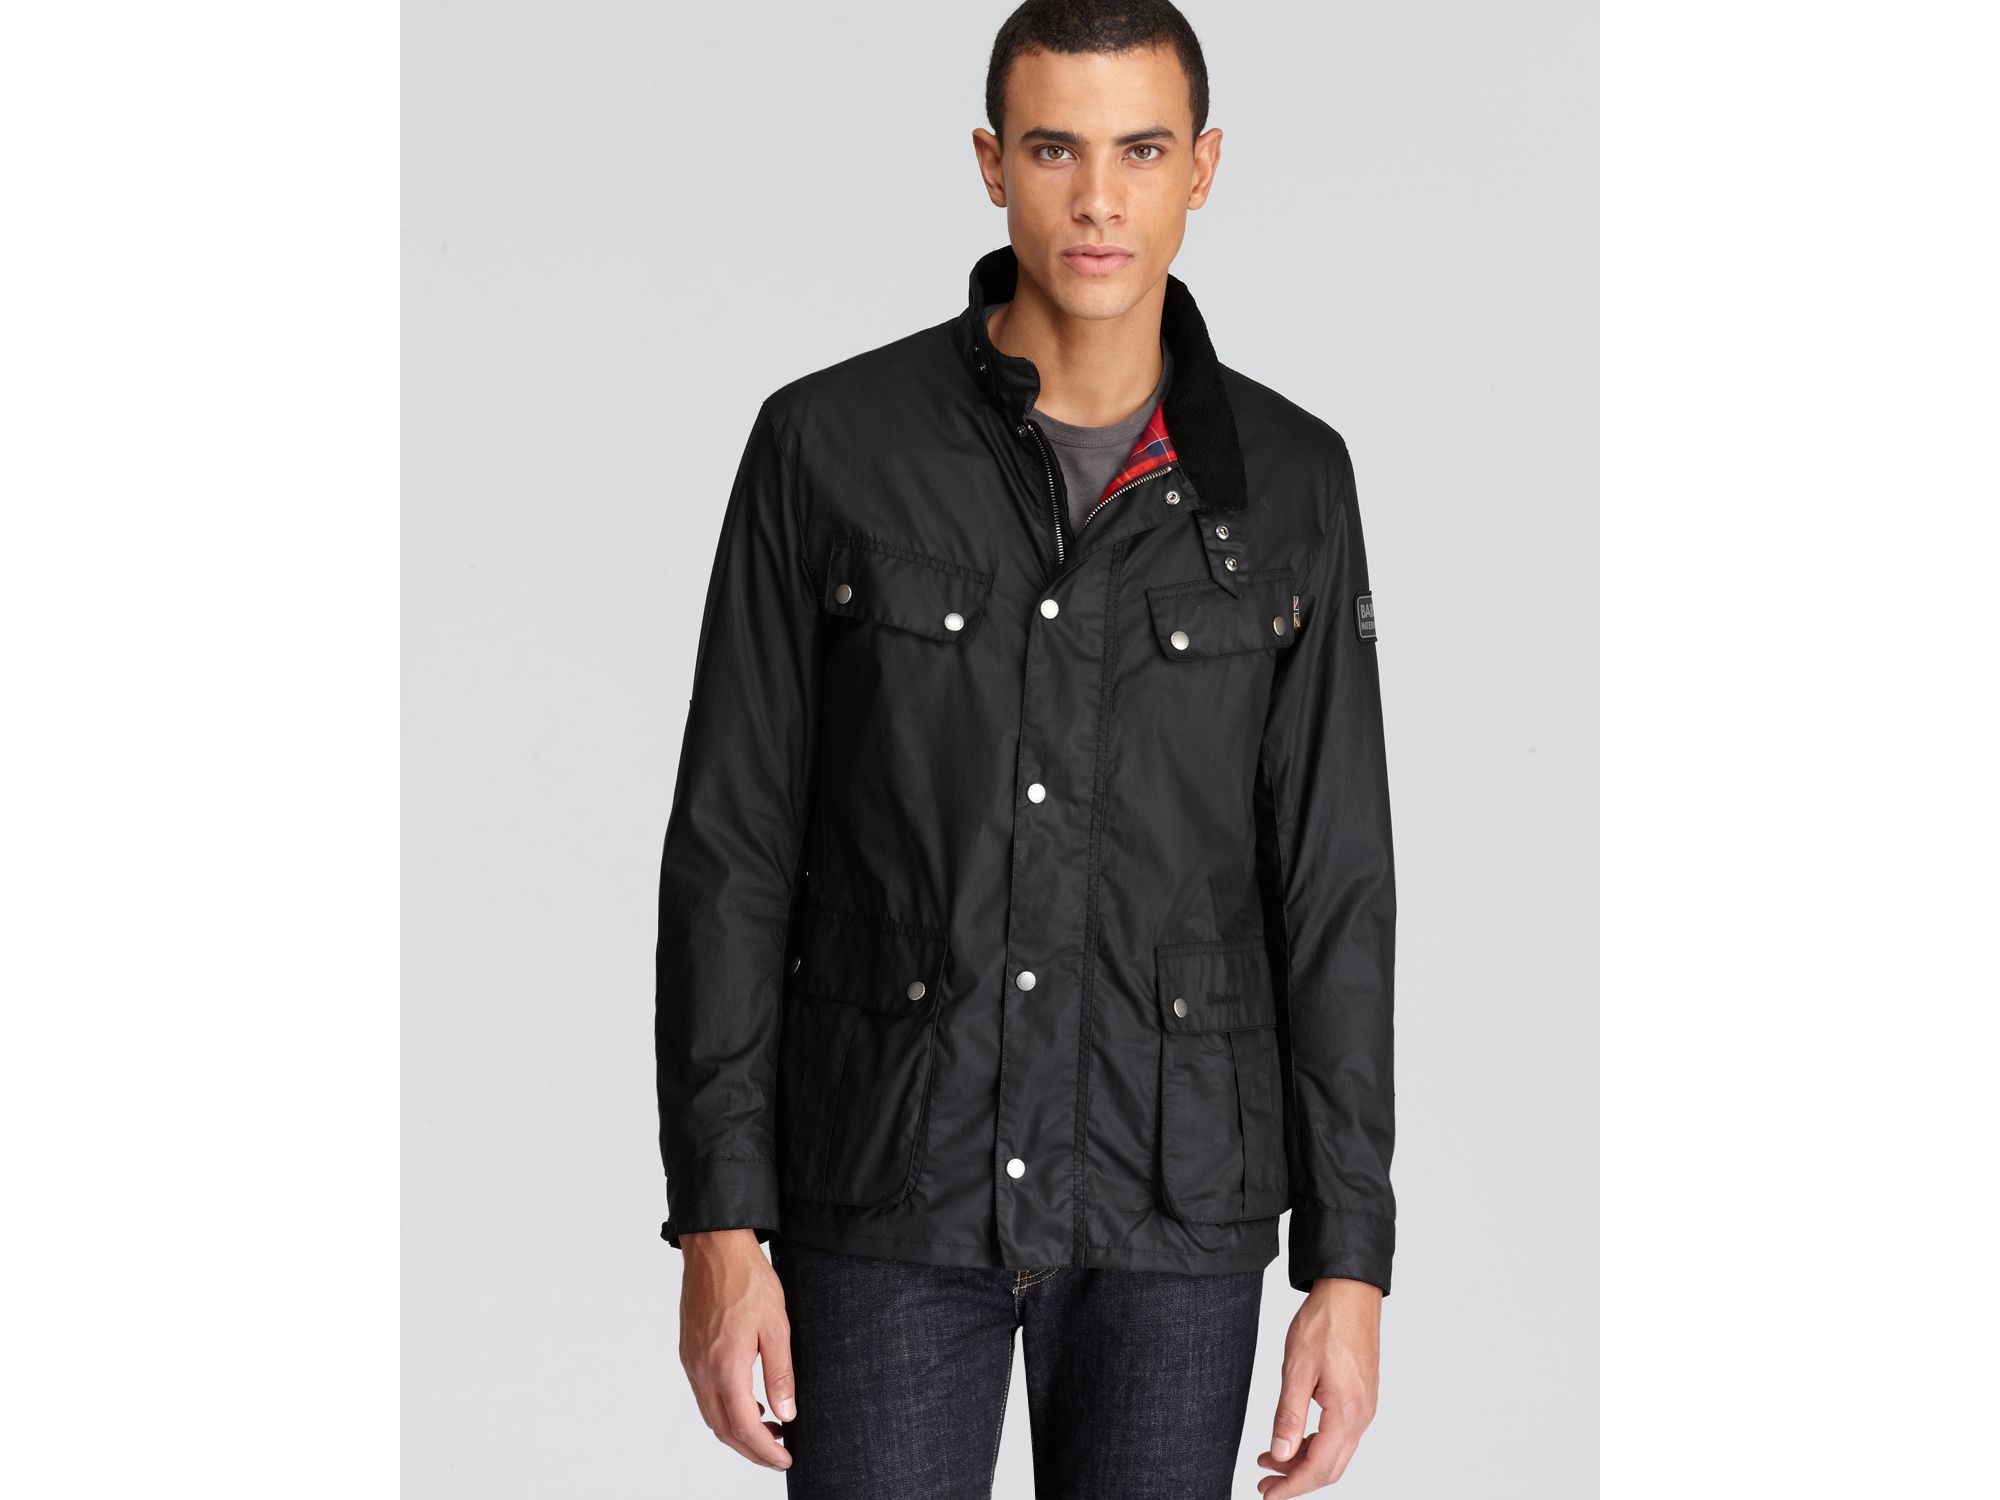 Barbour Waxed Field Jacket Outlet, SAVE 60%.